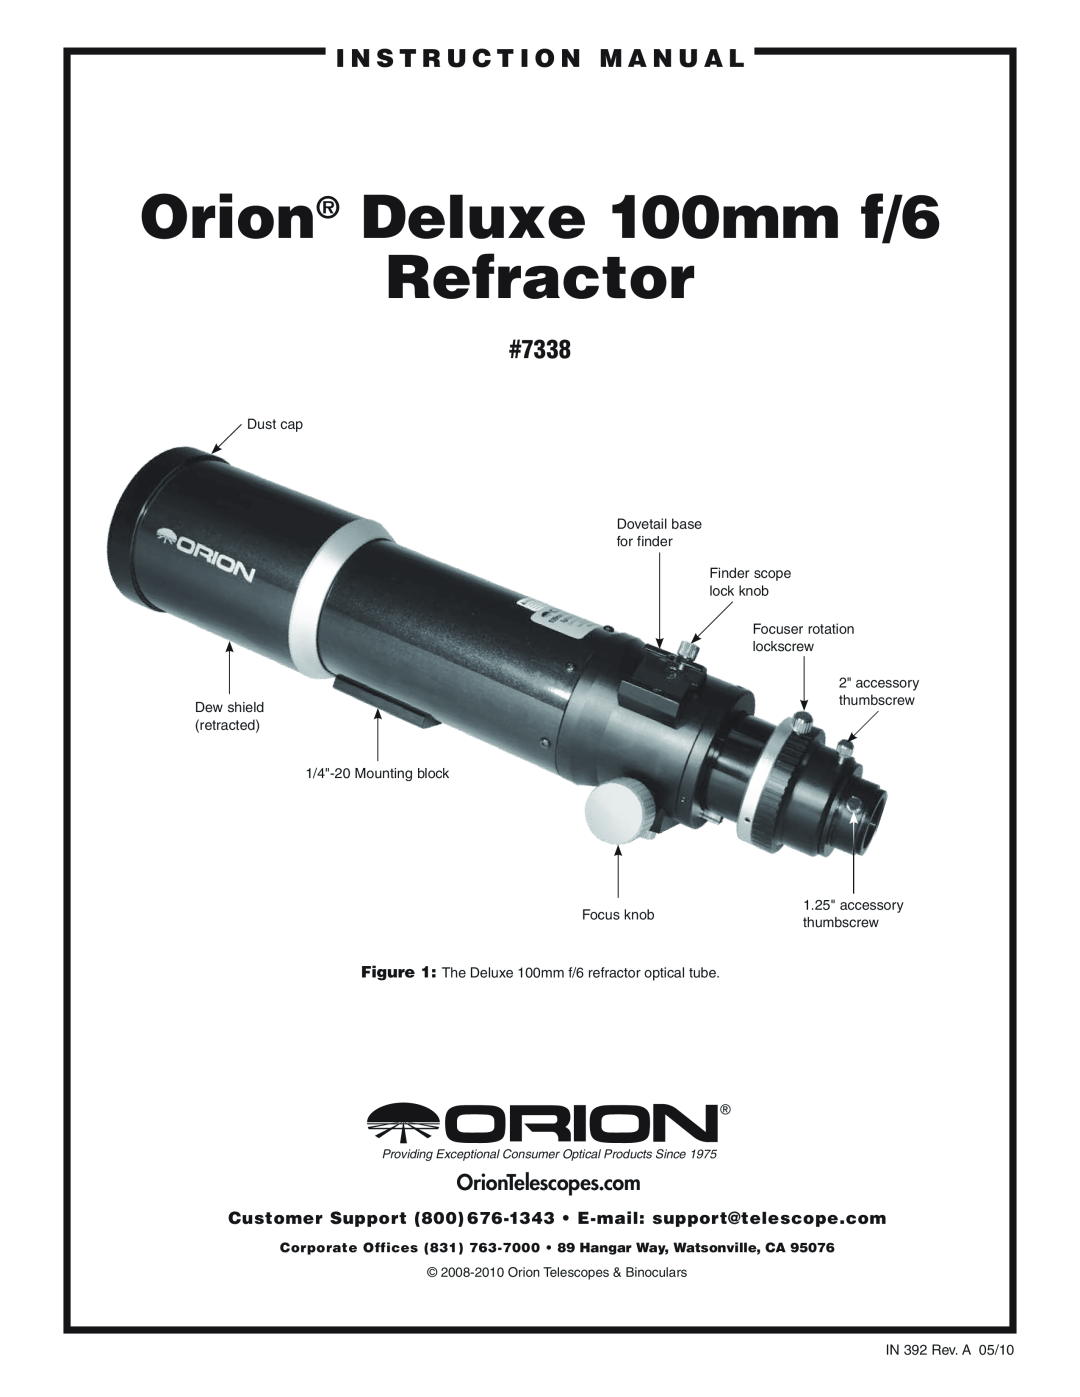 Orion instruction manual i n s t r u c t i o n M a n u a l, #7338, Orion Deluxe 100mm f/6 Refractor 